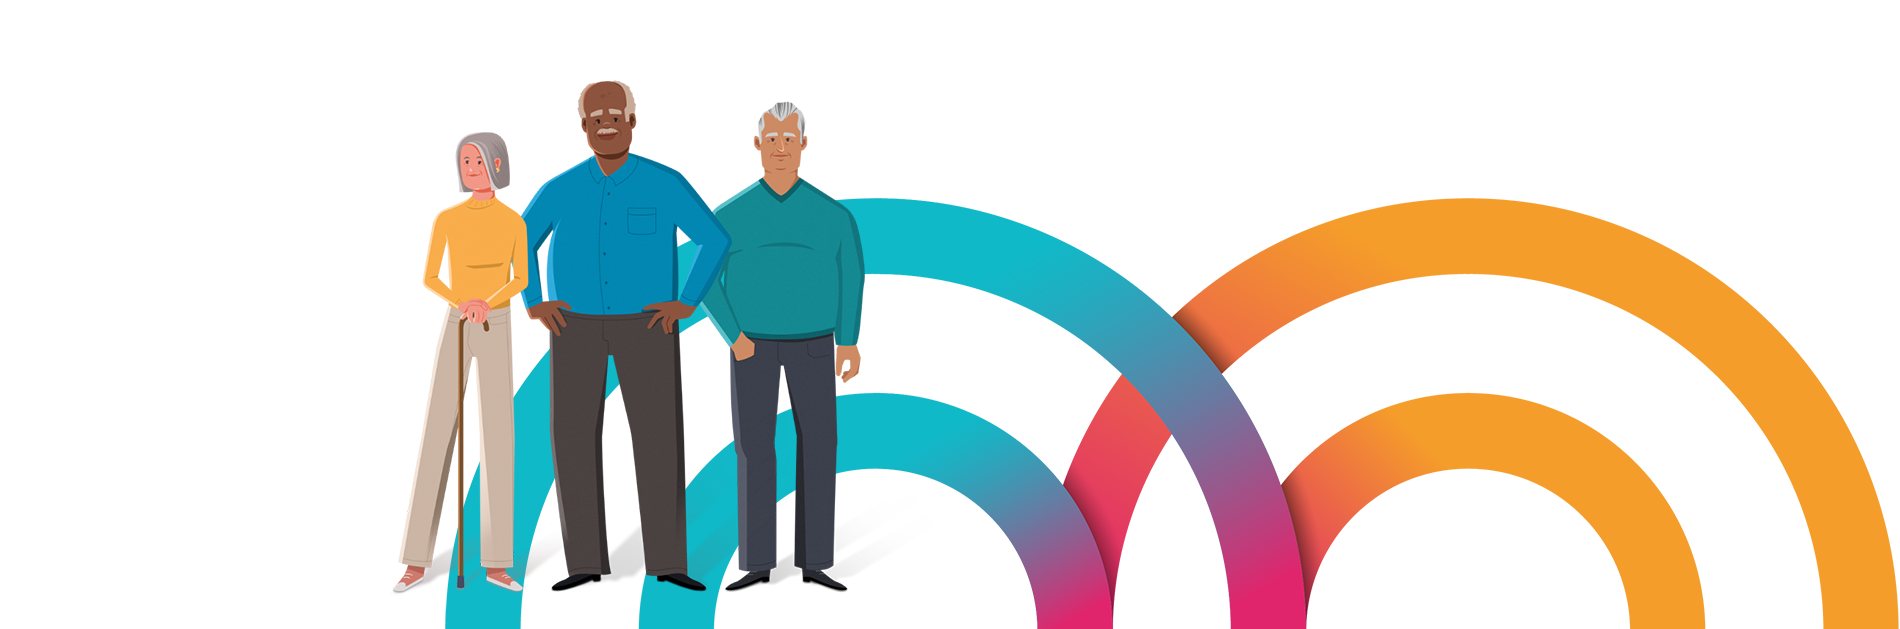 Illustration of three adult patients standing, including 1 woman with a cane and 2 men in front of a background of colorful circles.